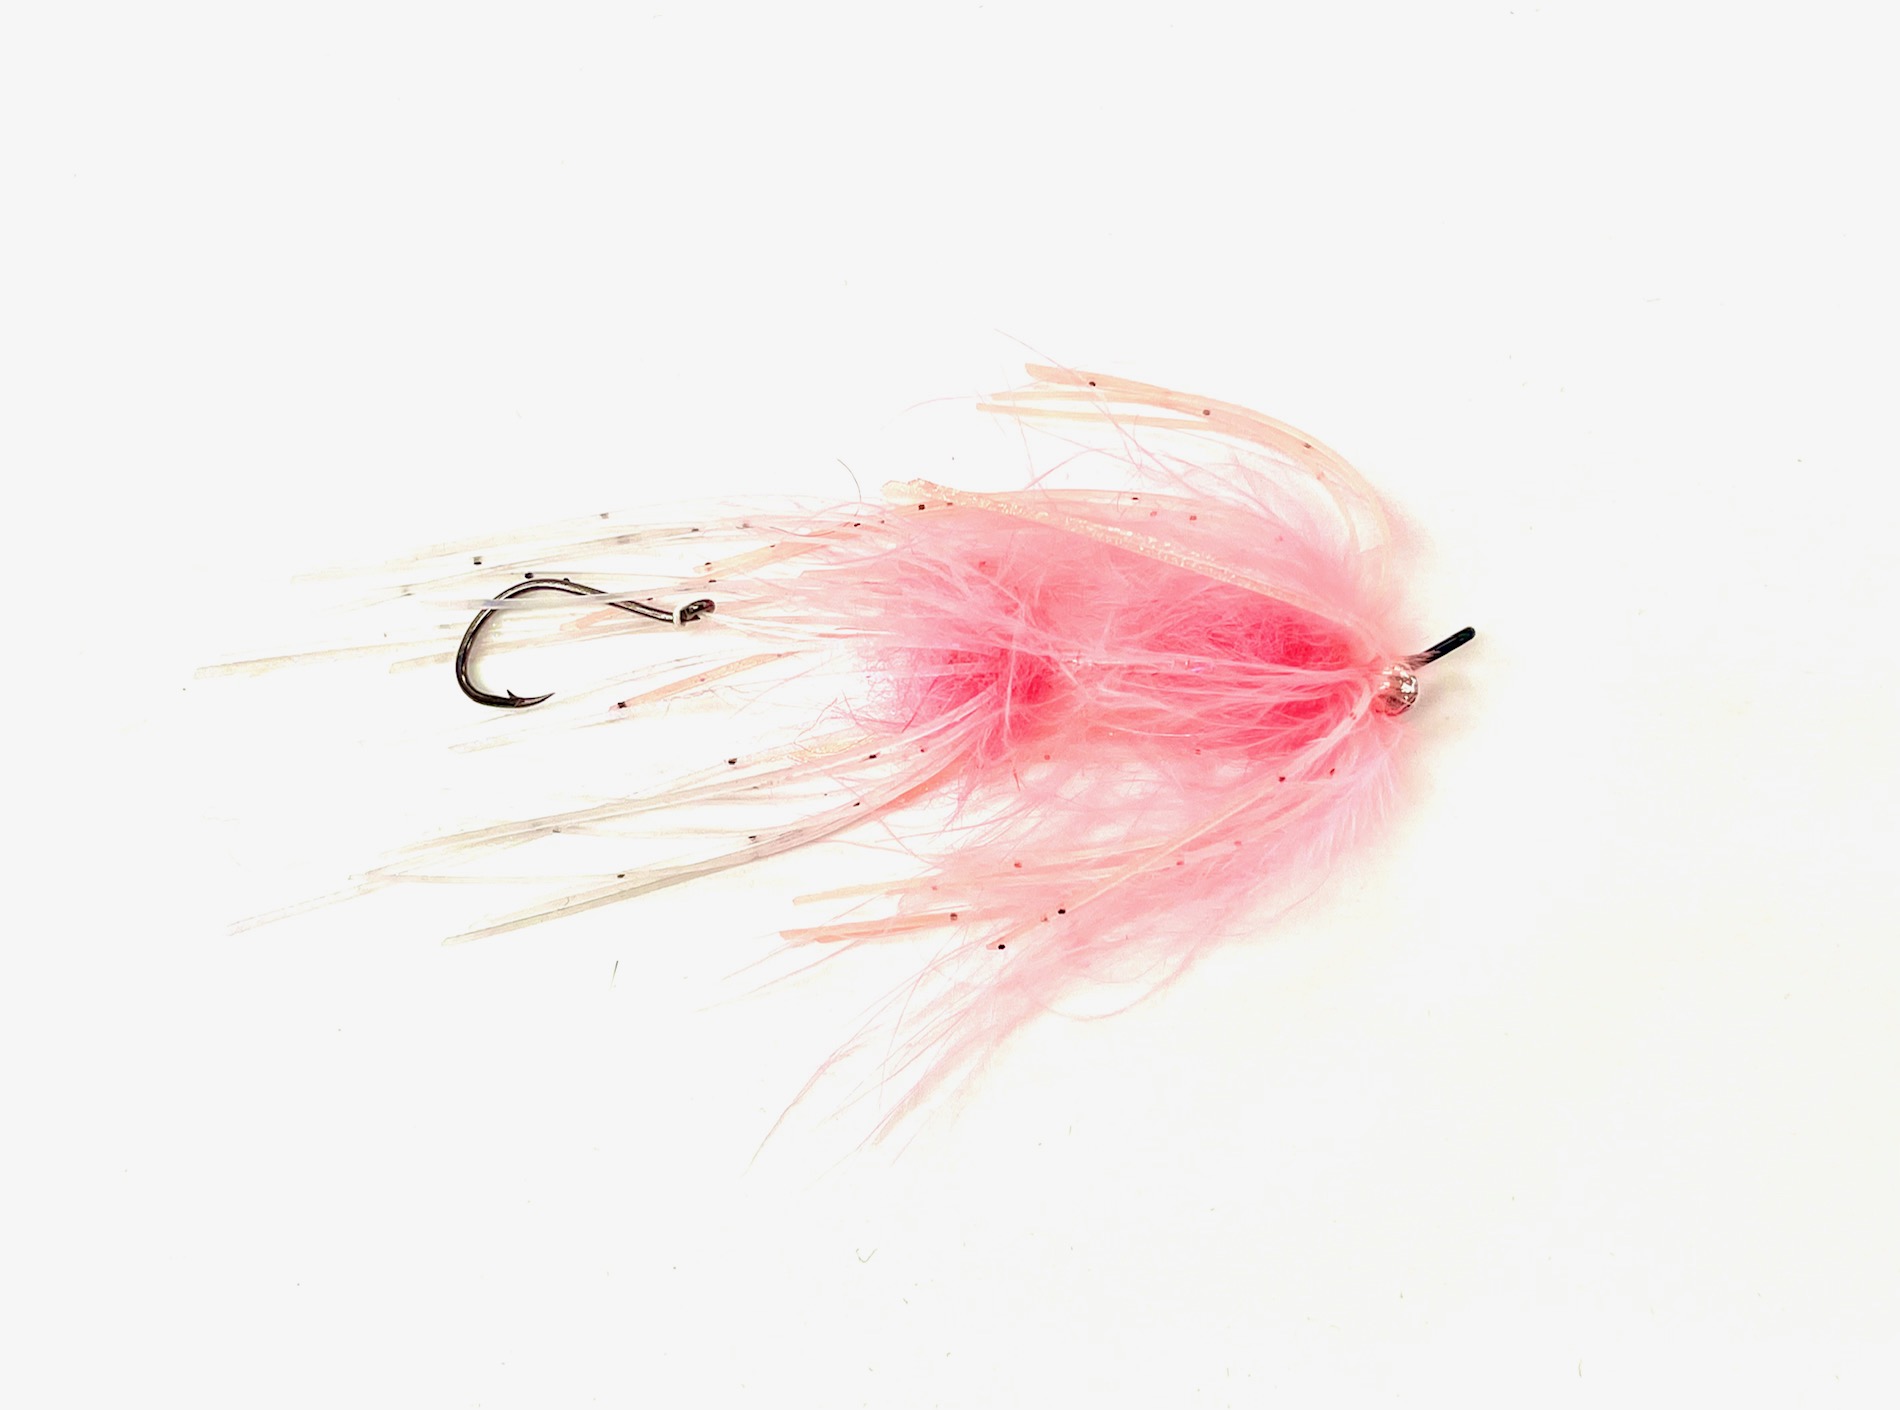 Solitude Fly Co. Squidro - Salmon Pink - Size 2